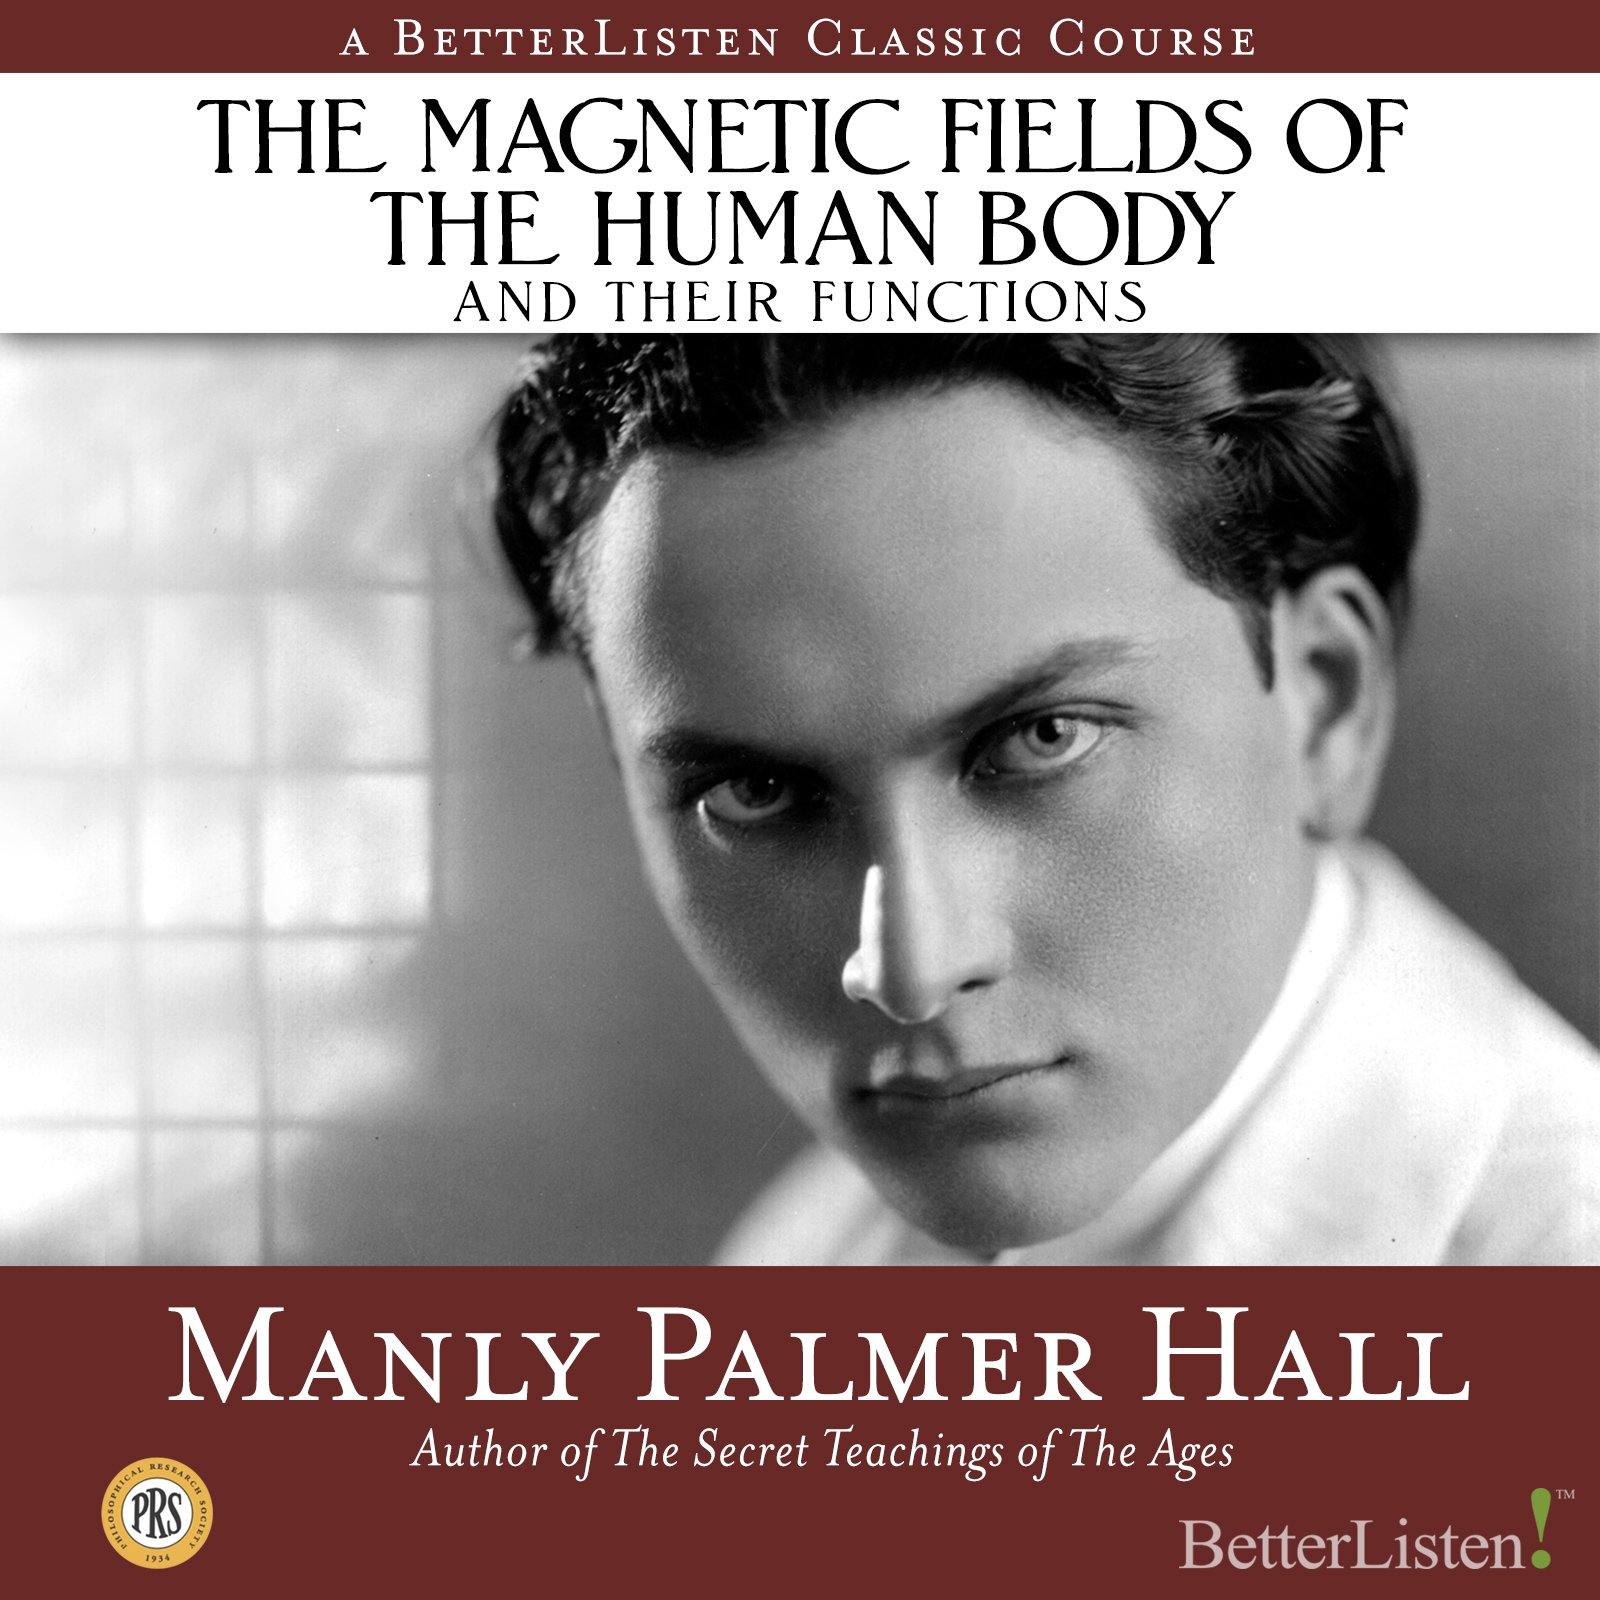 The Magnetic Fields of the Human Body and Their Functions with Manly P. Hall - BetterListen!